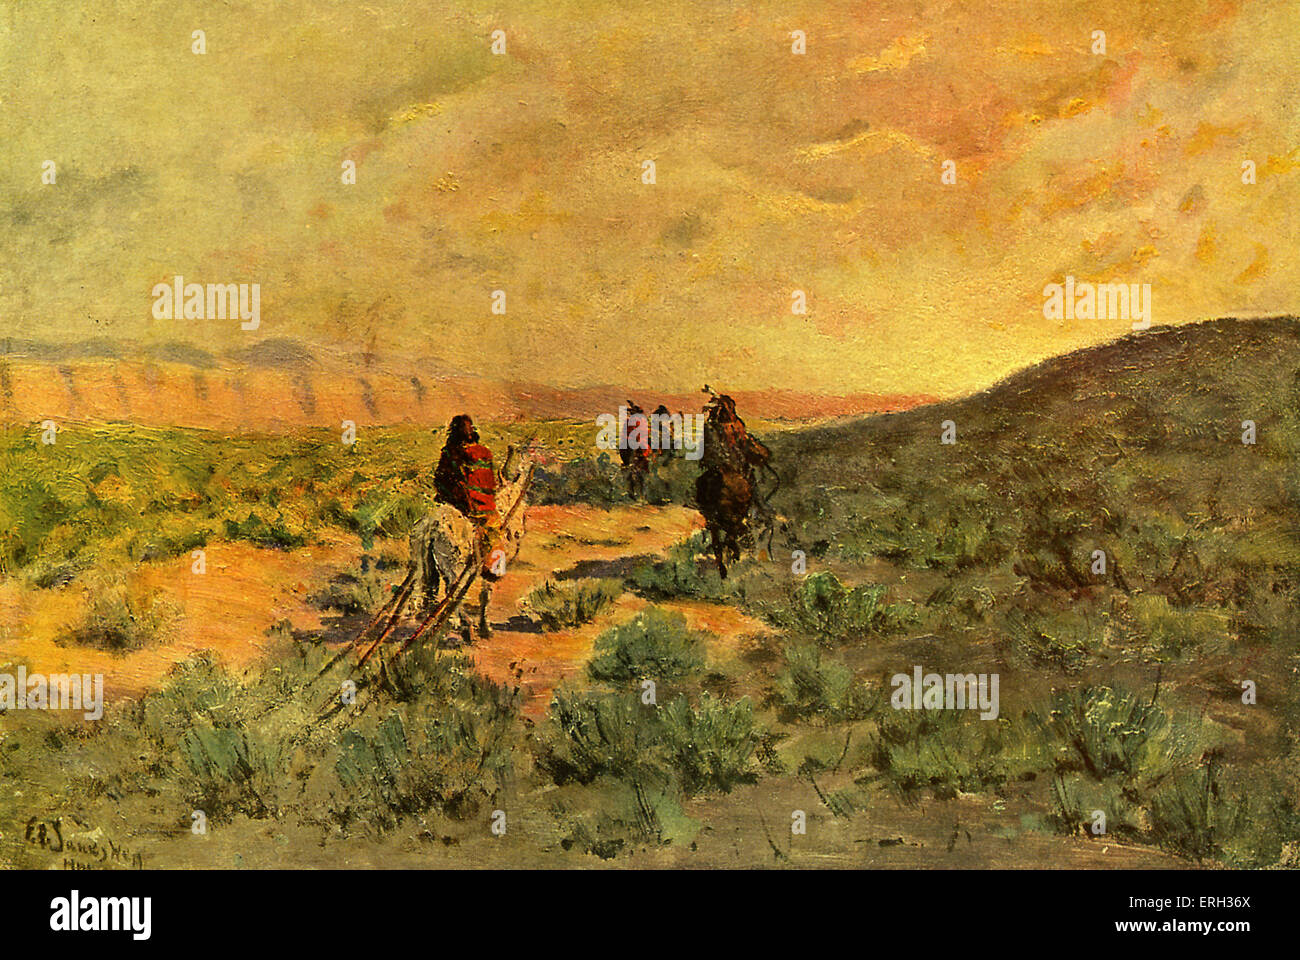 Navahos Moving Camp  - shows the nomadic people of the Native American Navaho tribe on horseback.  c. 1901. Illustration by Stock Photo